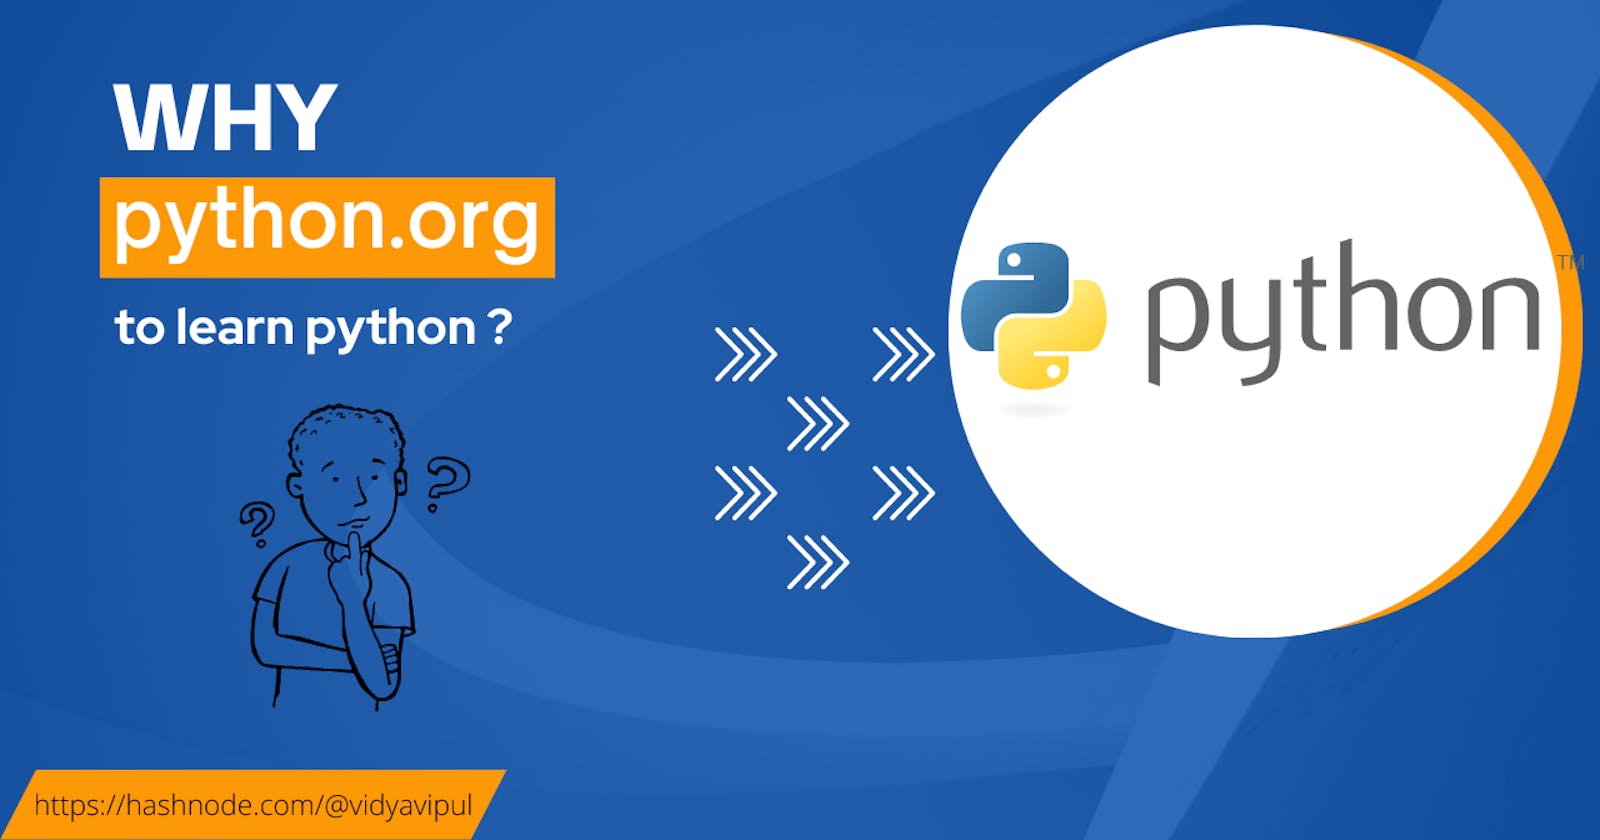 Learn Python from the Source: Python.org